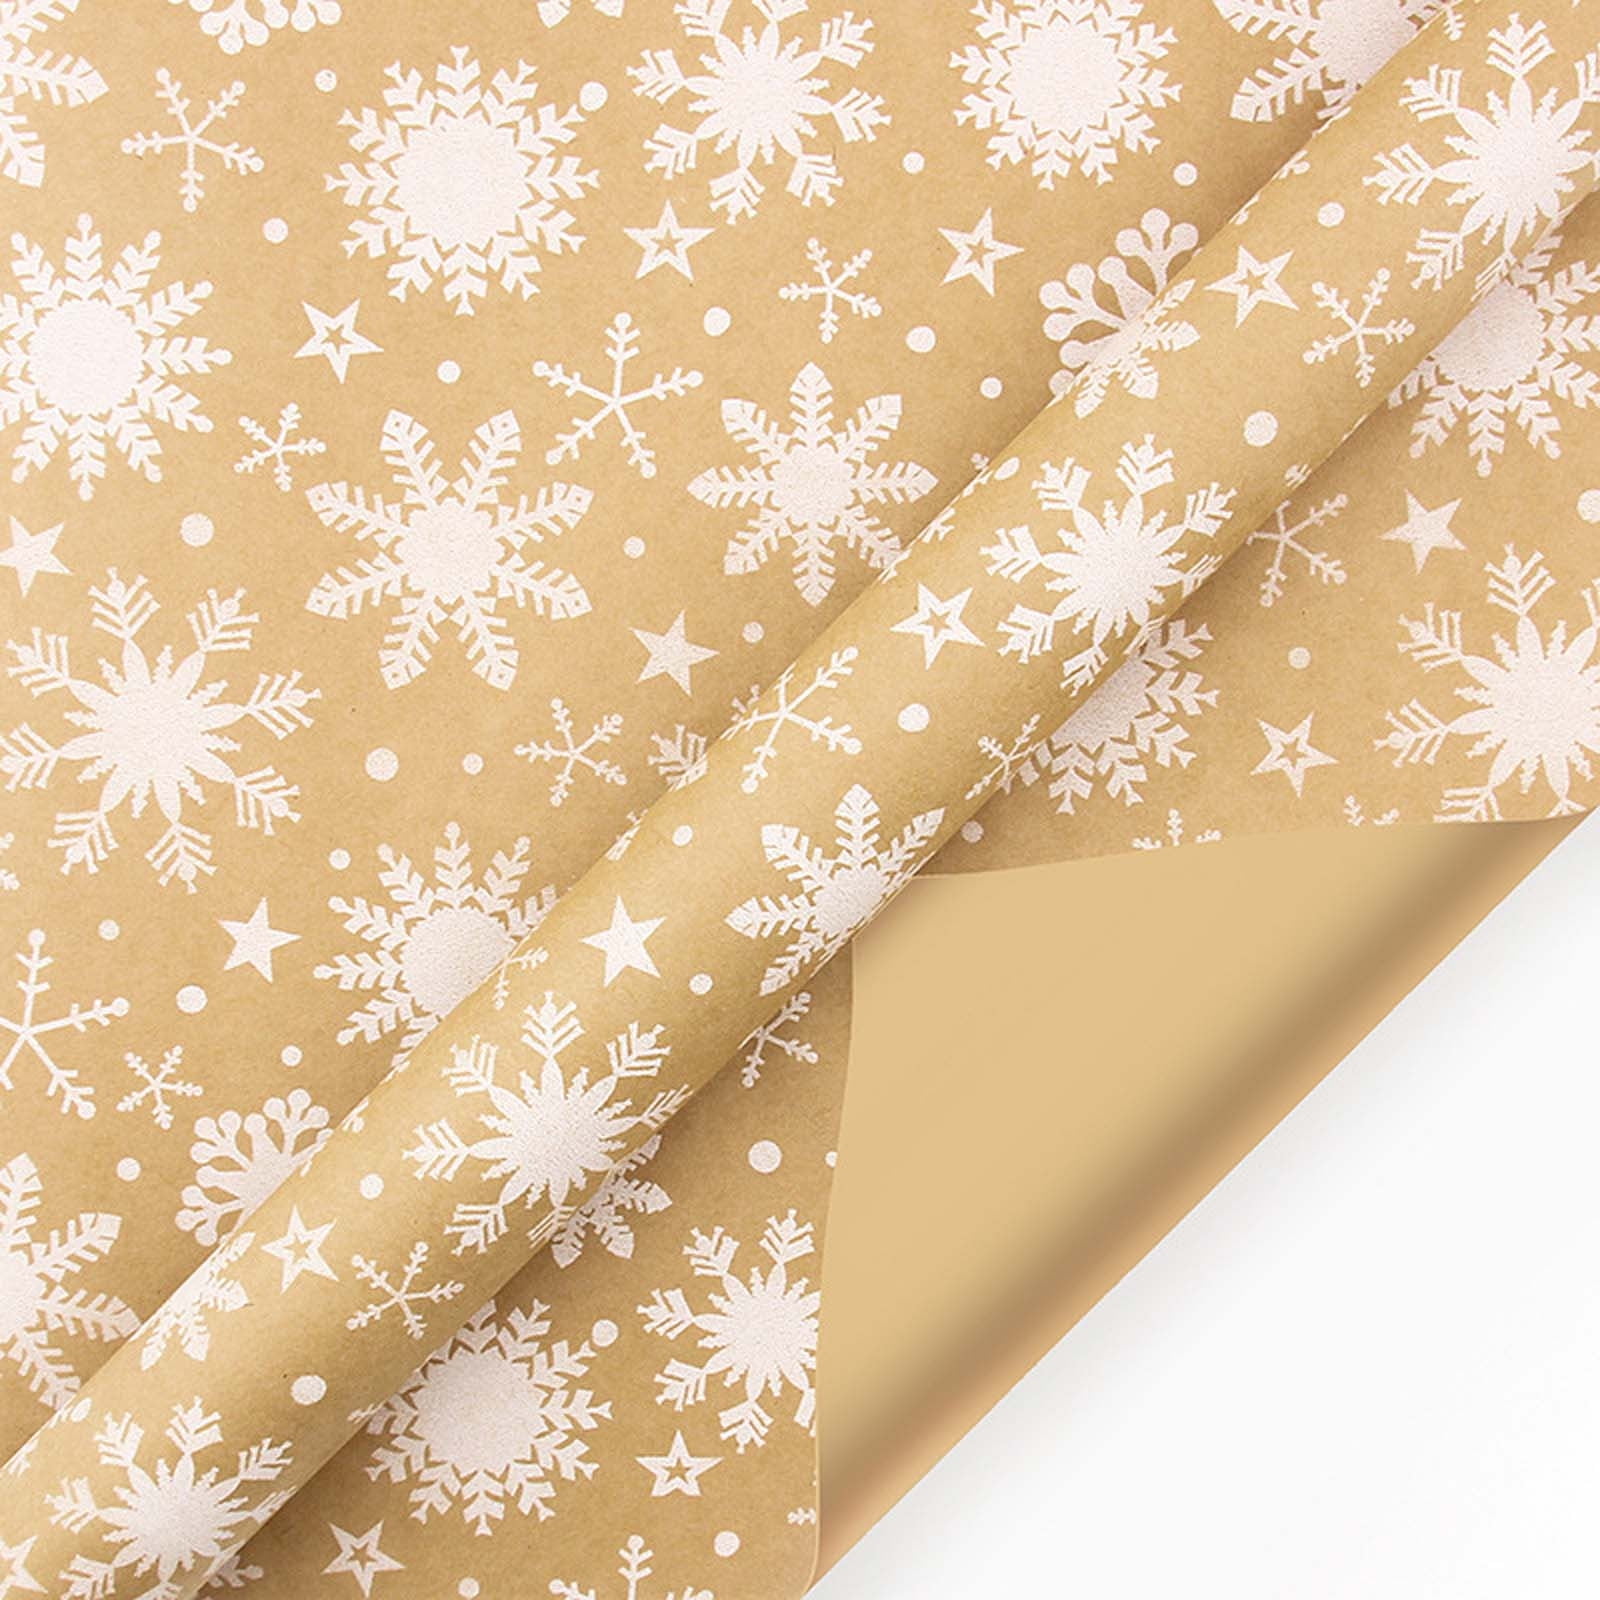 solacol Christmas Wrapping Paper Rolls Christmas Wrapping Paper ...